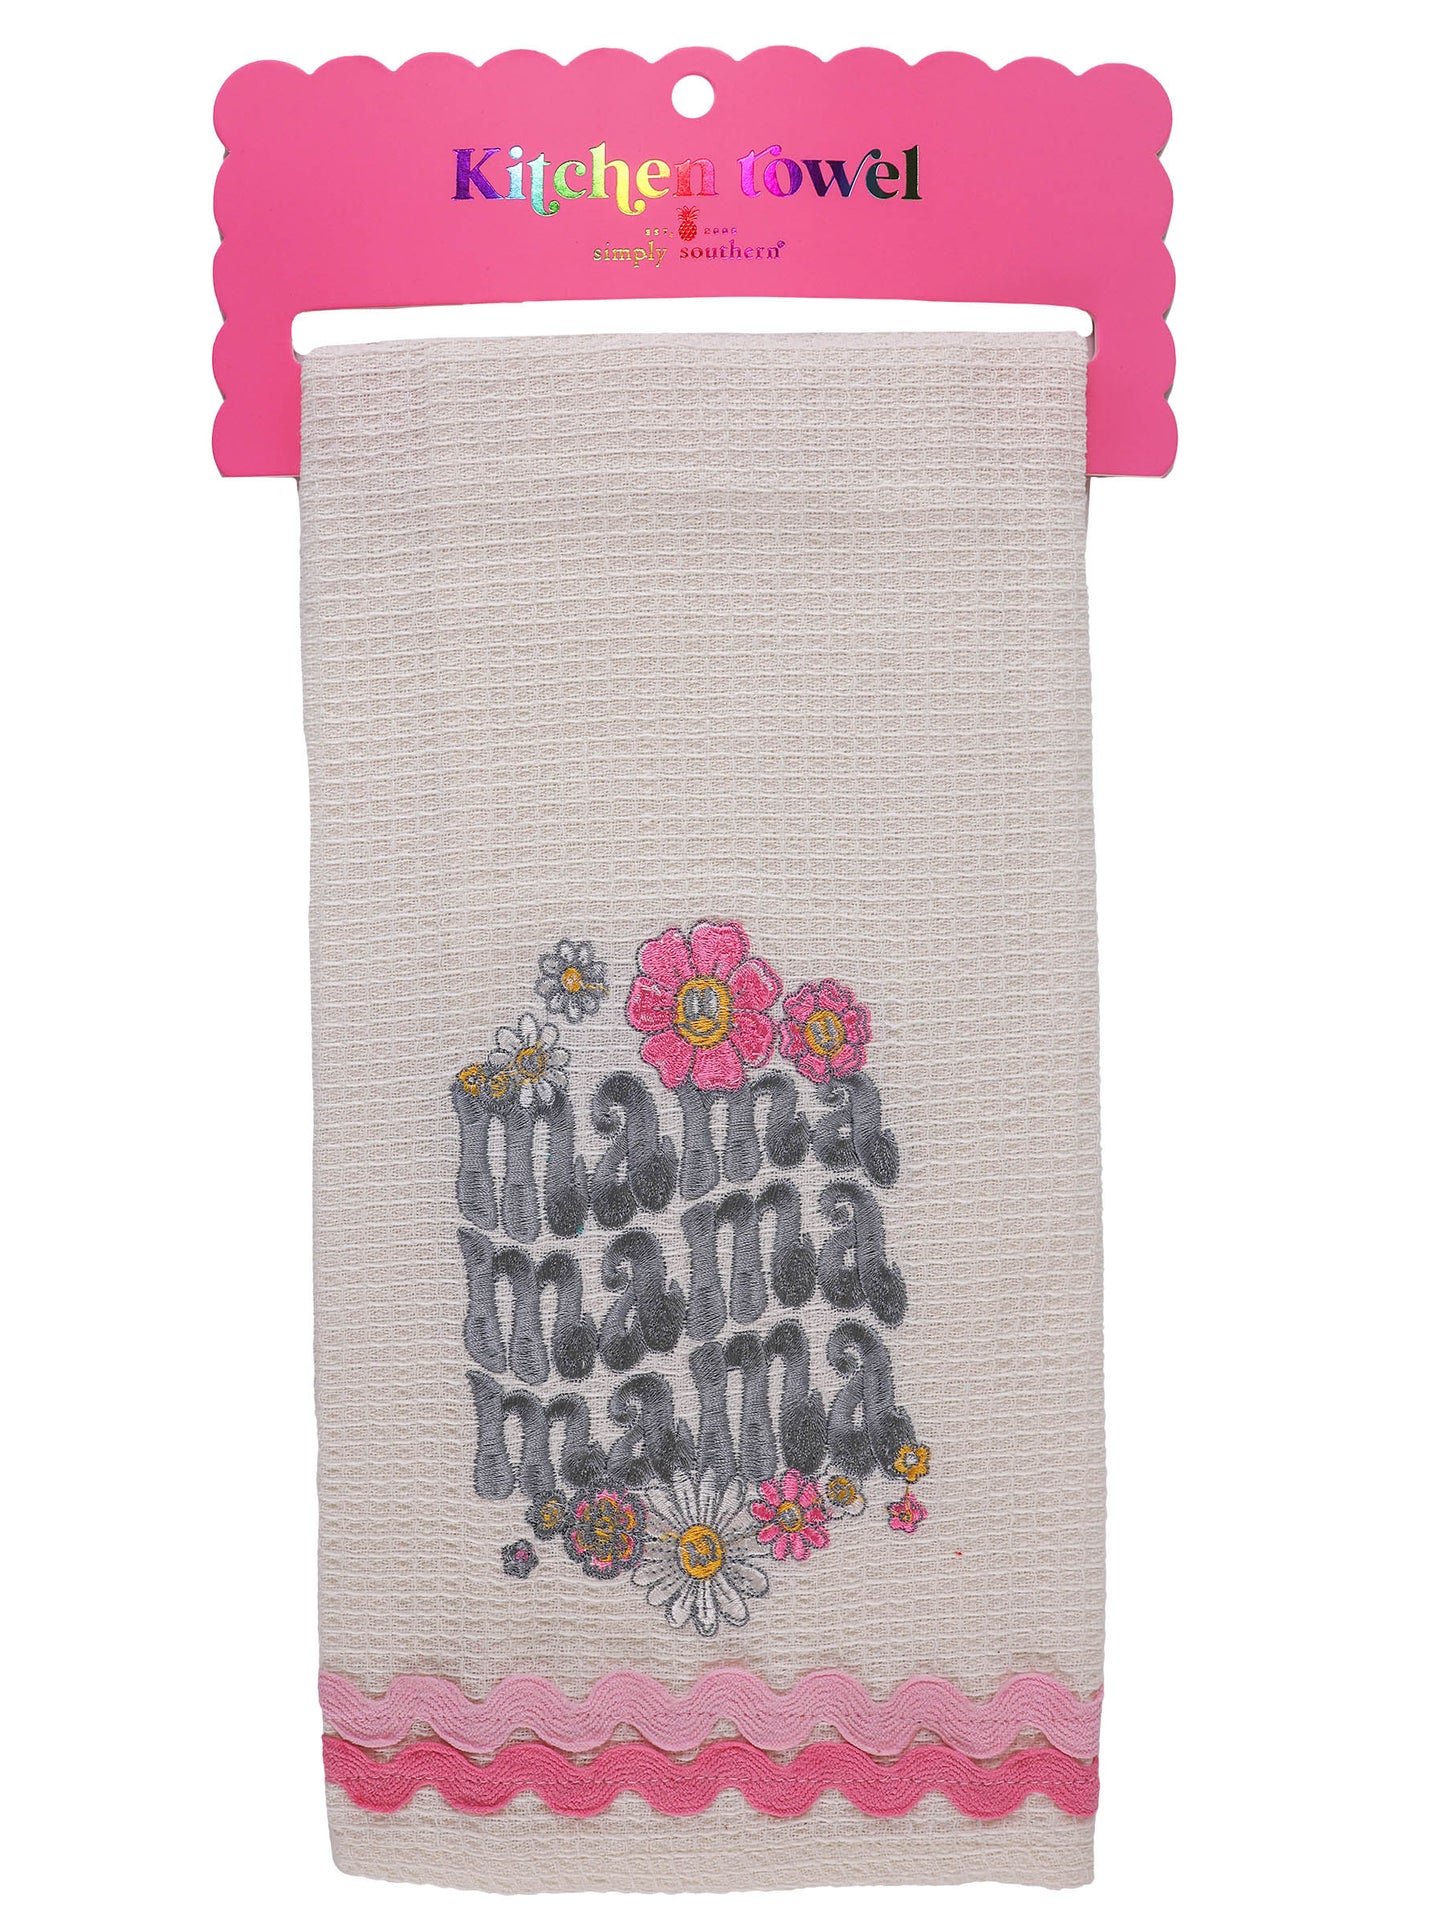 Simply Southern Kitchen Towels